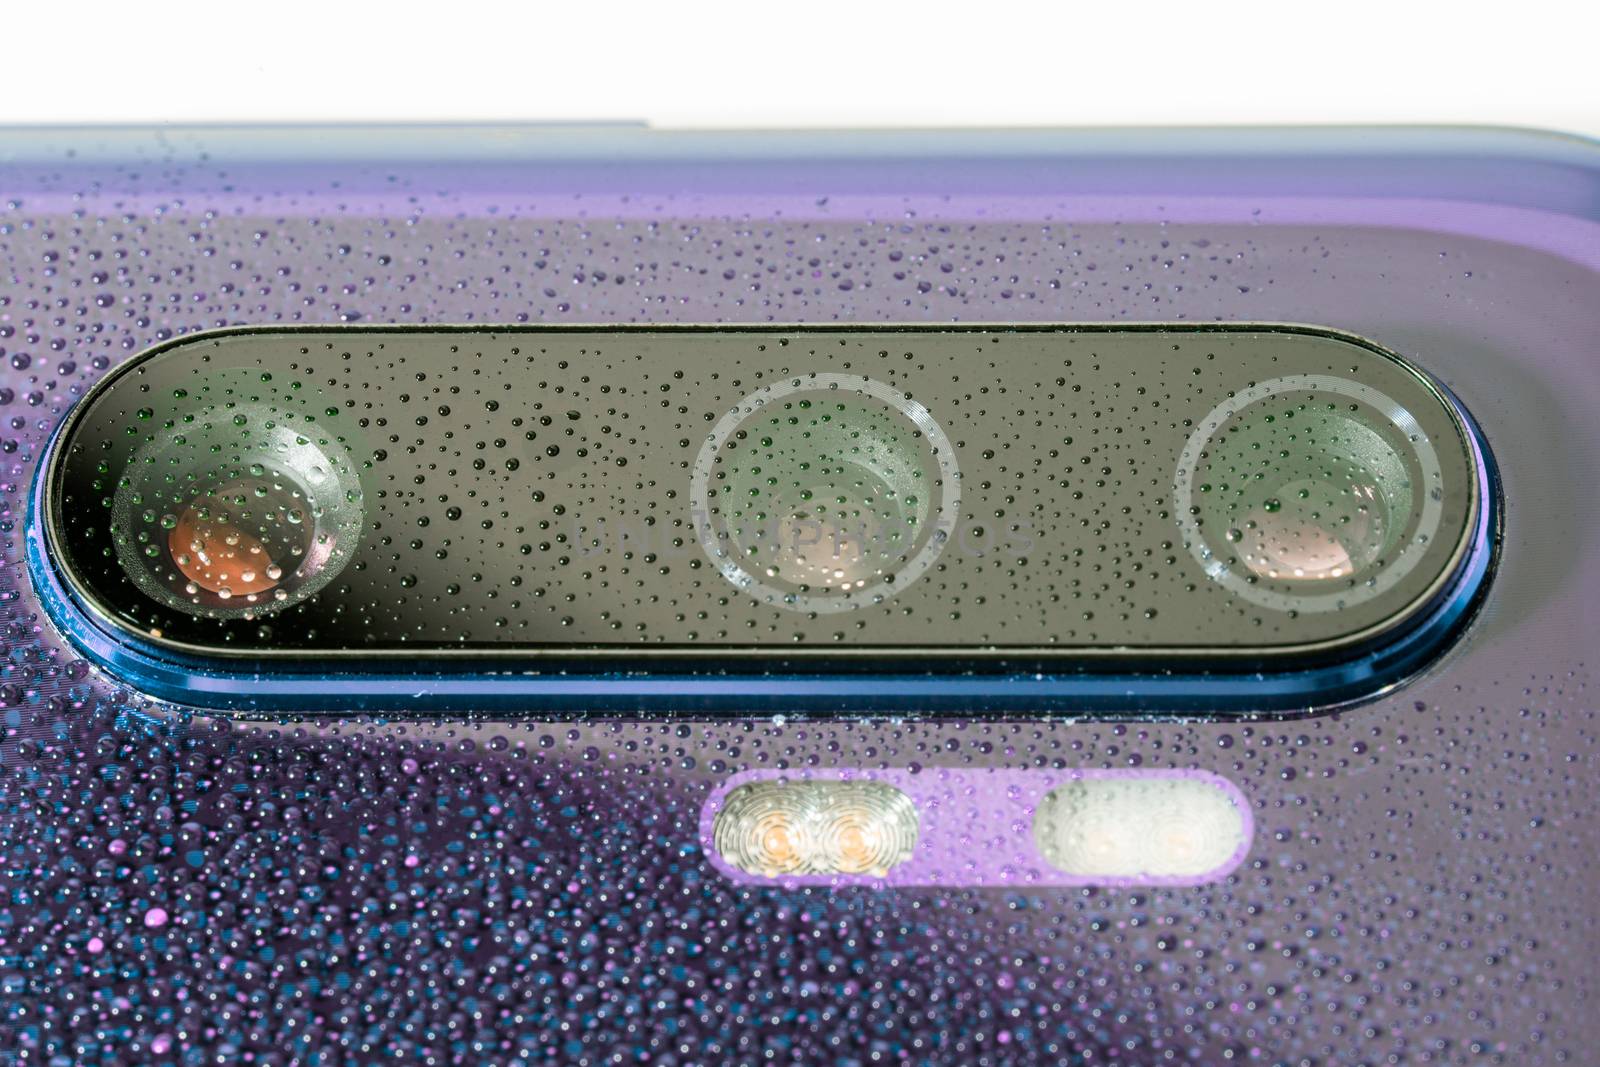 purple phone camera lens covered with small water drops - close-up with selective focus and blur by z1b